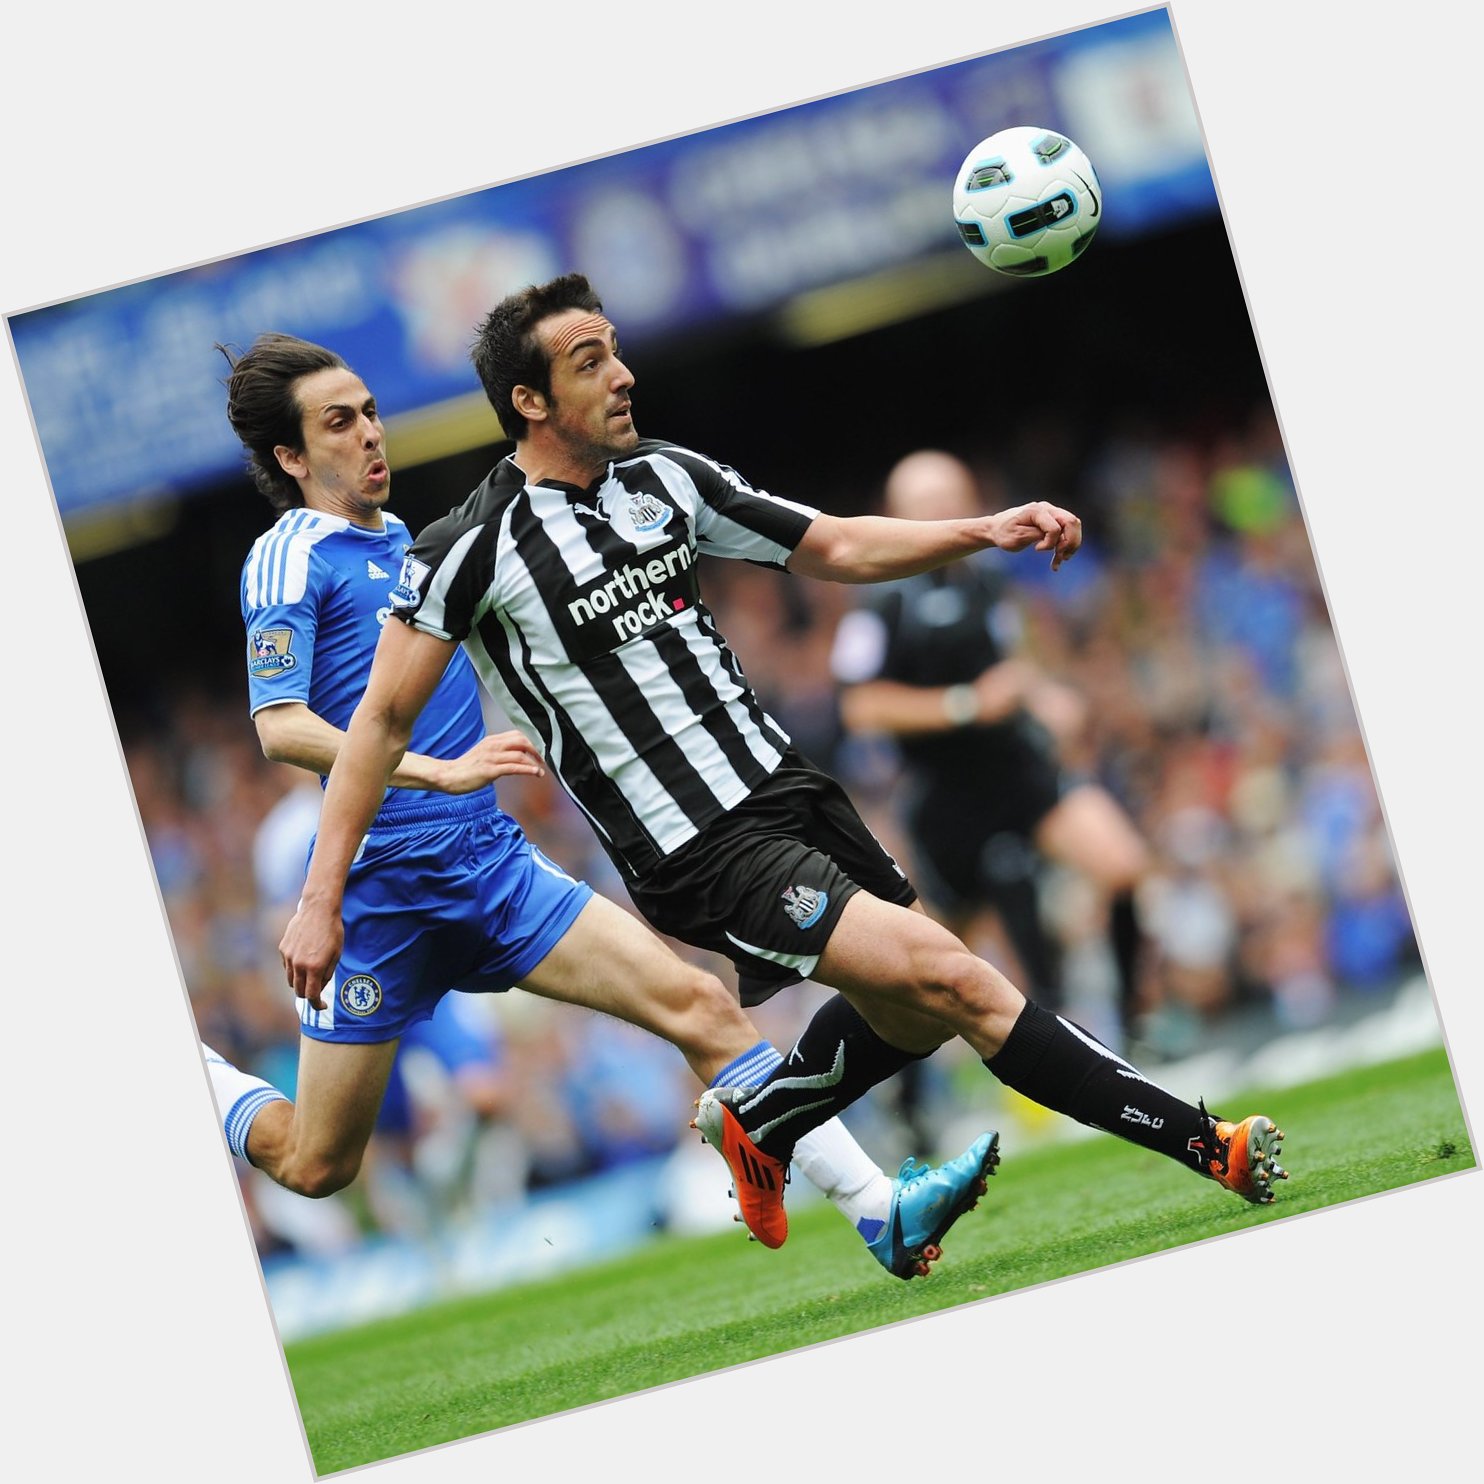 Happy TOON Birthday too.... Former left back Jose Enrique

We hope you have a TOONTASTIC Day Jose 